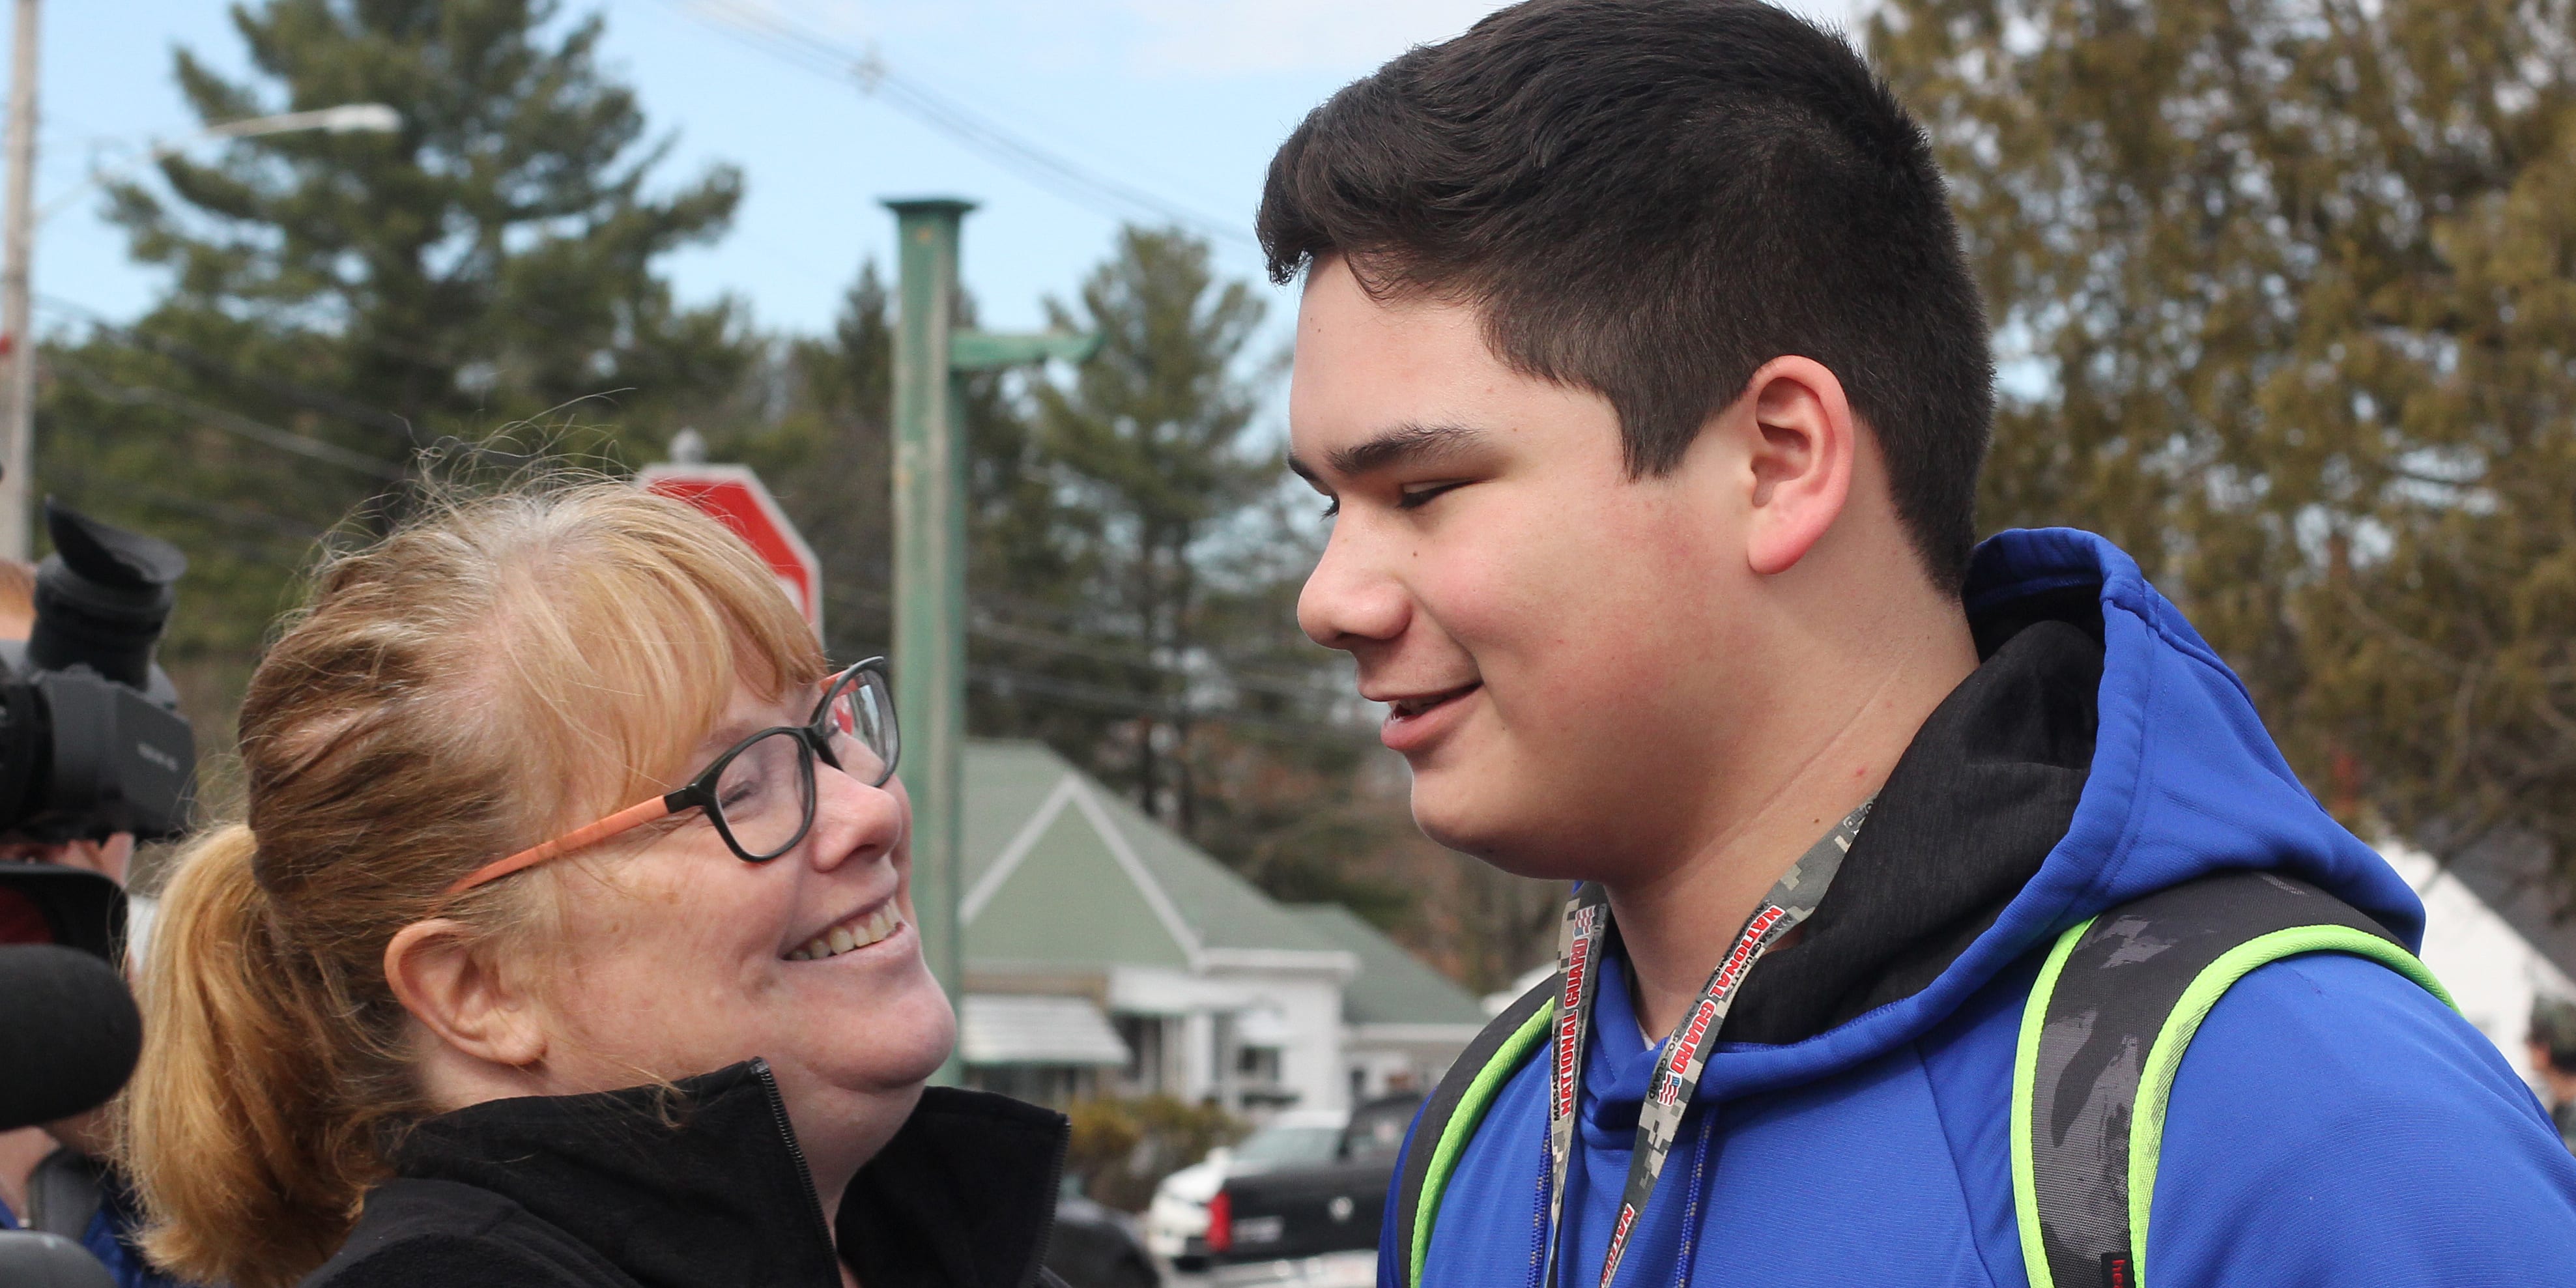 Tracy Siose and her son Christian reunite after the lockdown at Northeast Metropolitan Regional Vocational Technical High School.